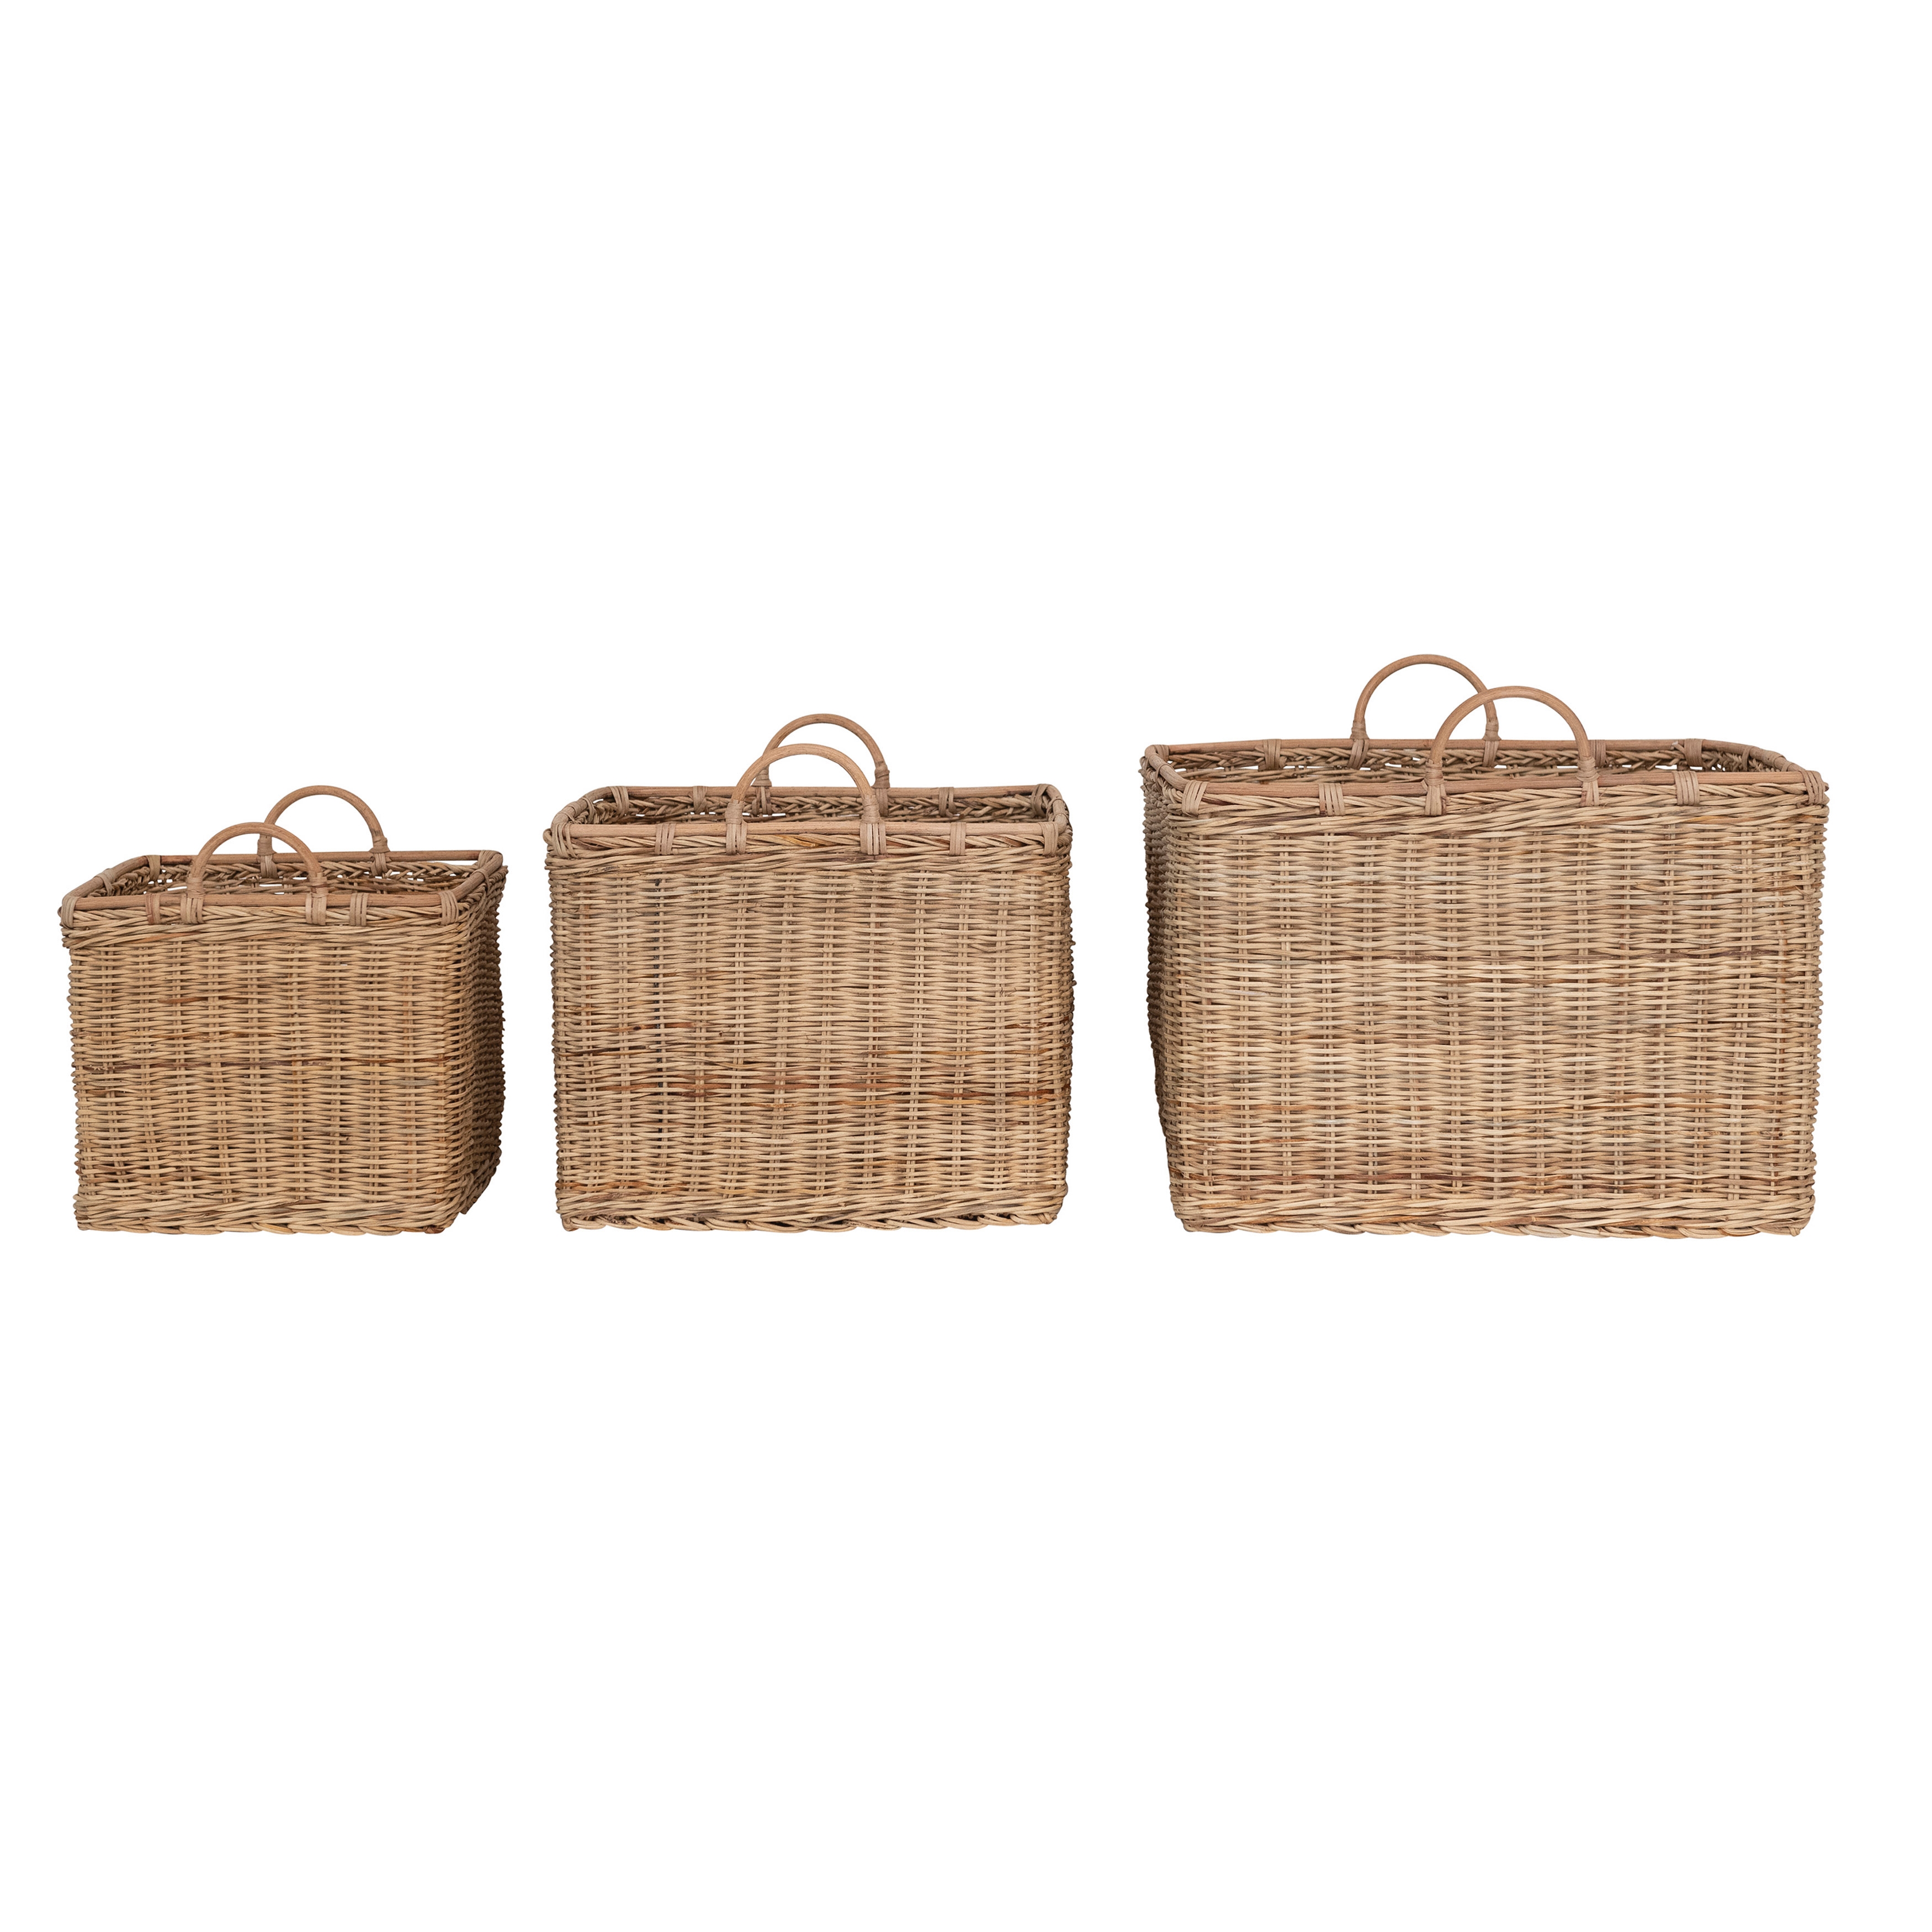 Various Square Rattan Baskets with Handles, Natural, Set of 3 - Image 0